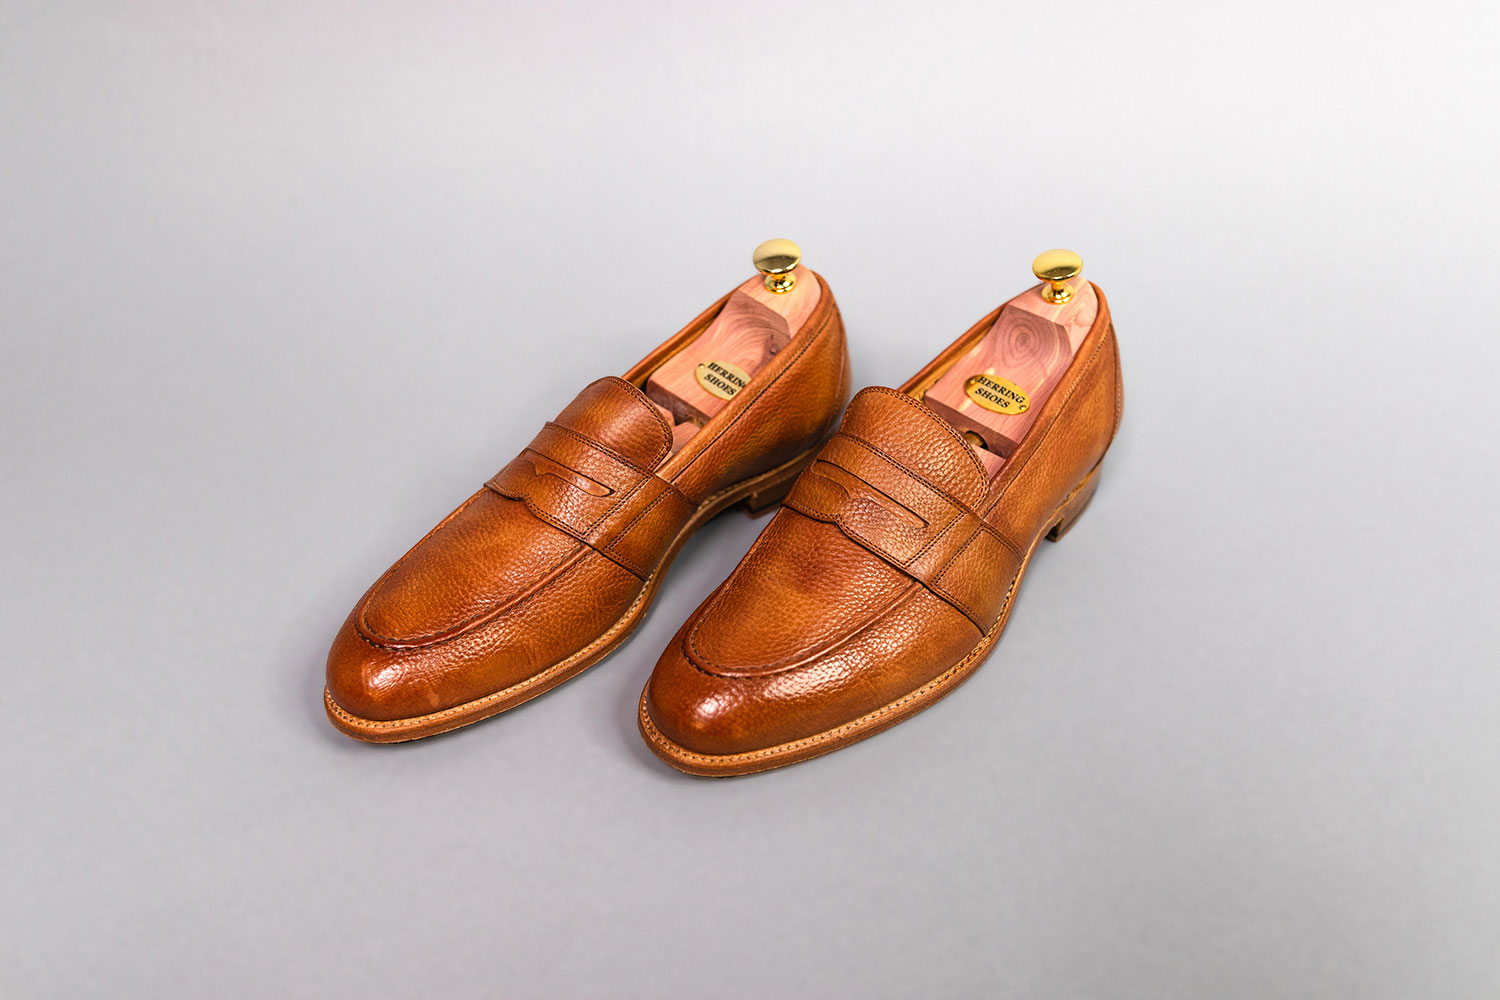 tan leather loafers from Herring facing left on gray background